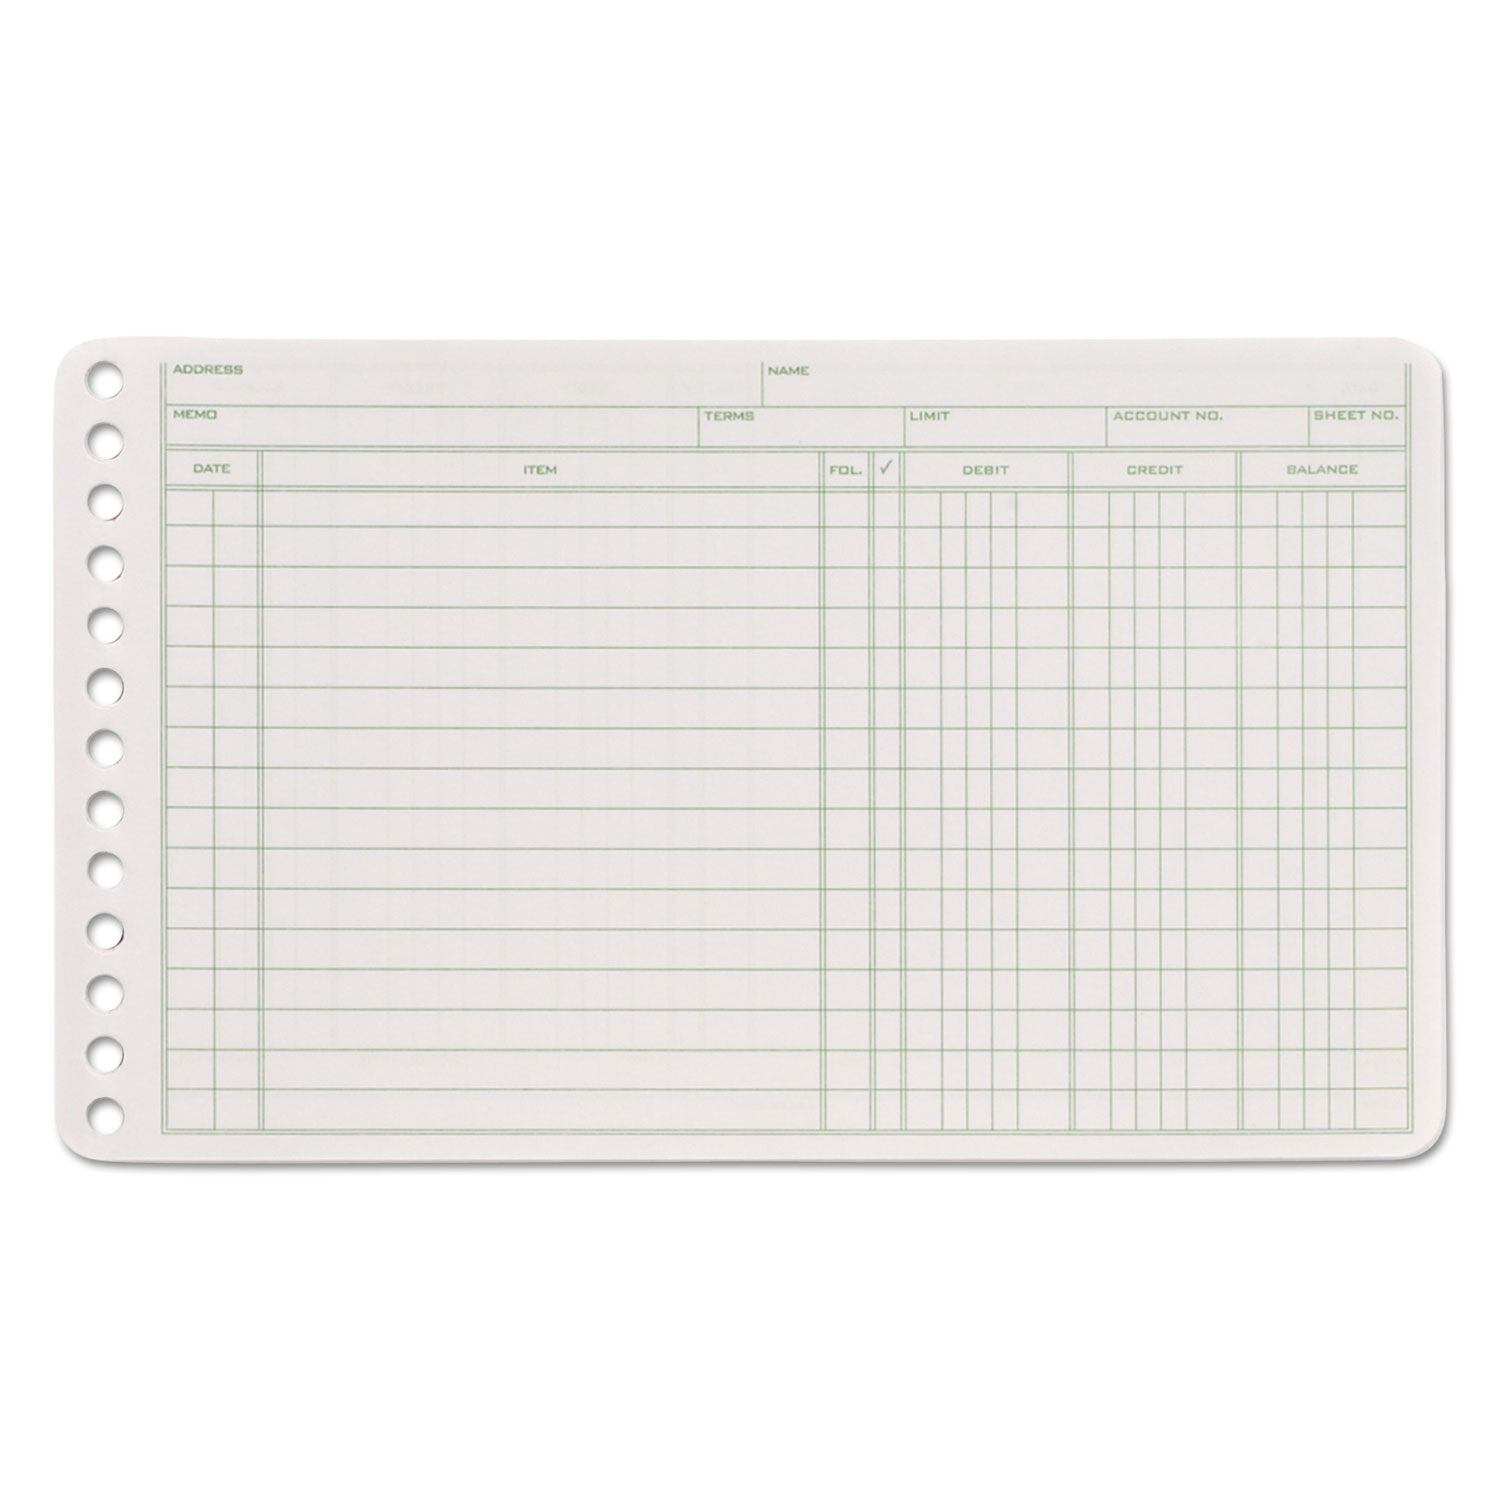  Adams ARB58100 Ledger Binder Refill Sheets, 6-Ring, 5 x 8 1/2, Green/White, 100 Sheets/Pack (ABFARB58100) 